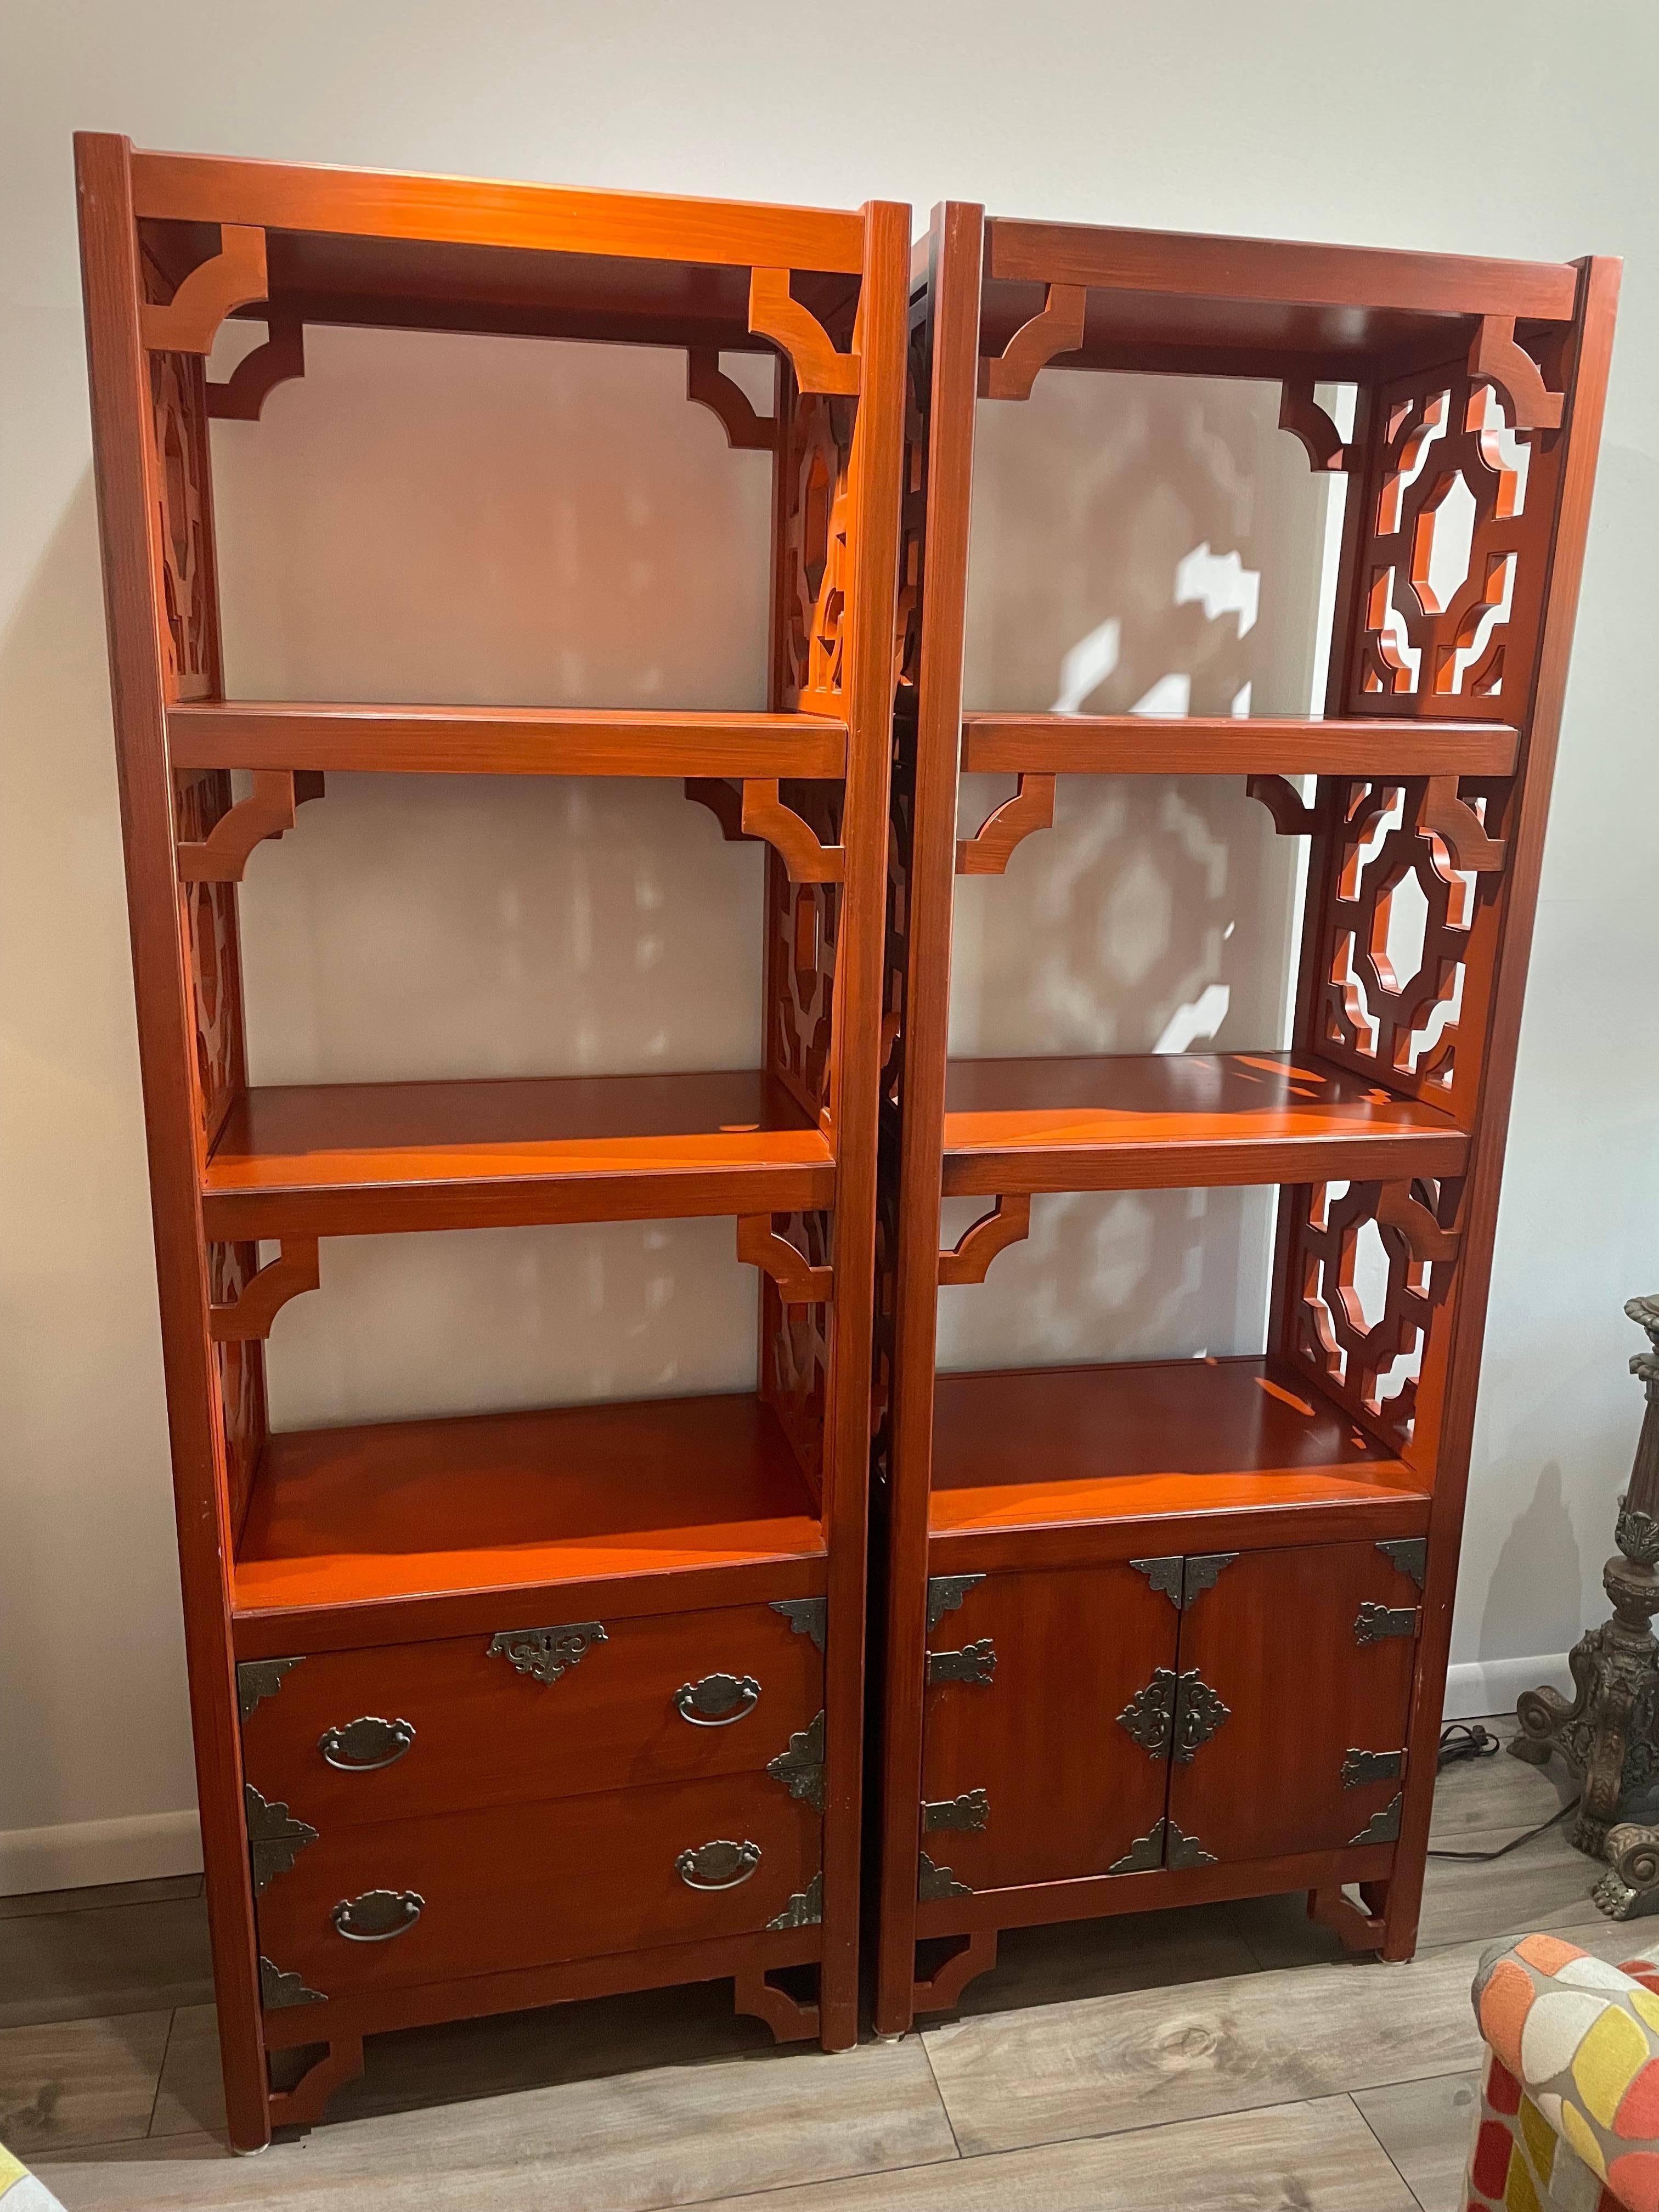 Maybe a burnt sienna or call it orange.
Super cool shelving with great storage below, 1 side is a side by side and the other cabinet is drawers.